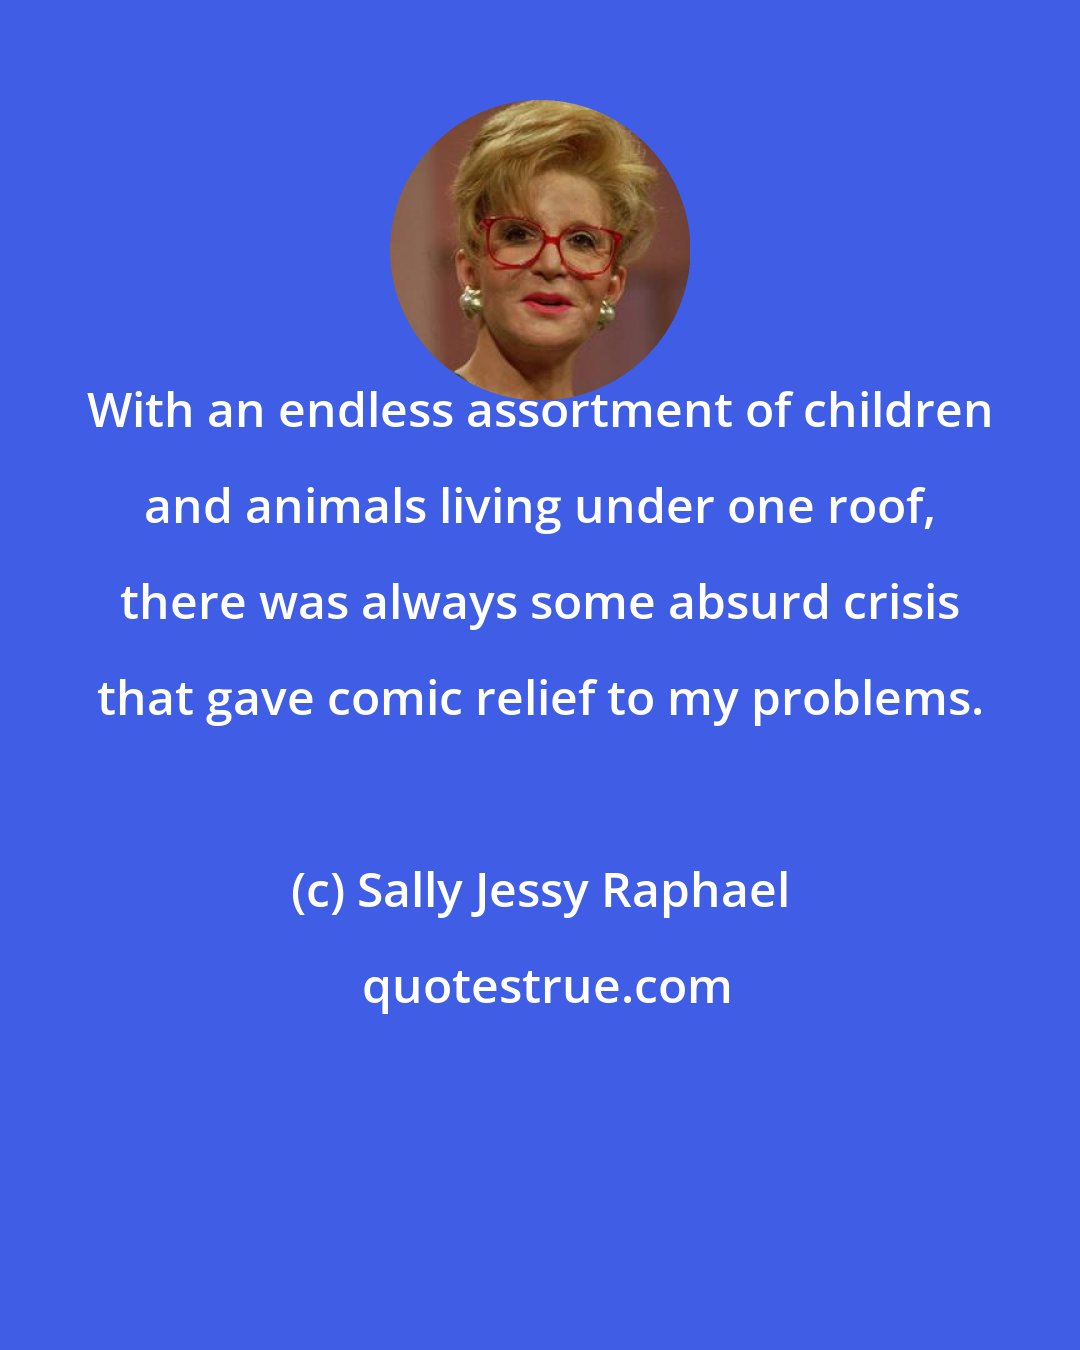 Sally Jessy Raphael: With an endless assortment of children and animals living under one roof, there was always some absurd crisis that gave comic relief to my problems.